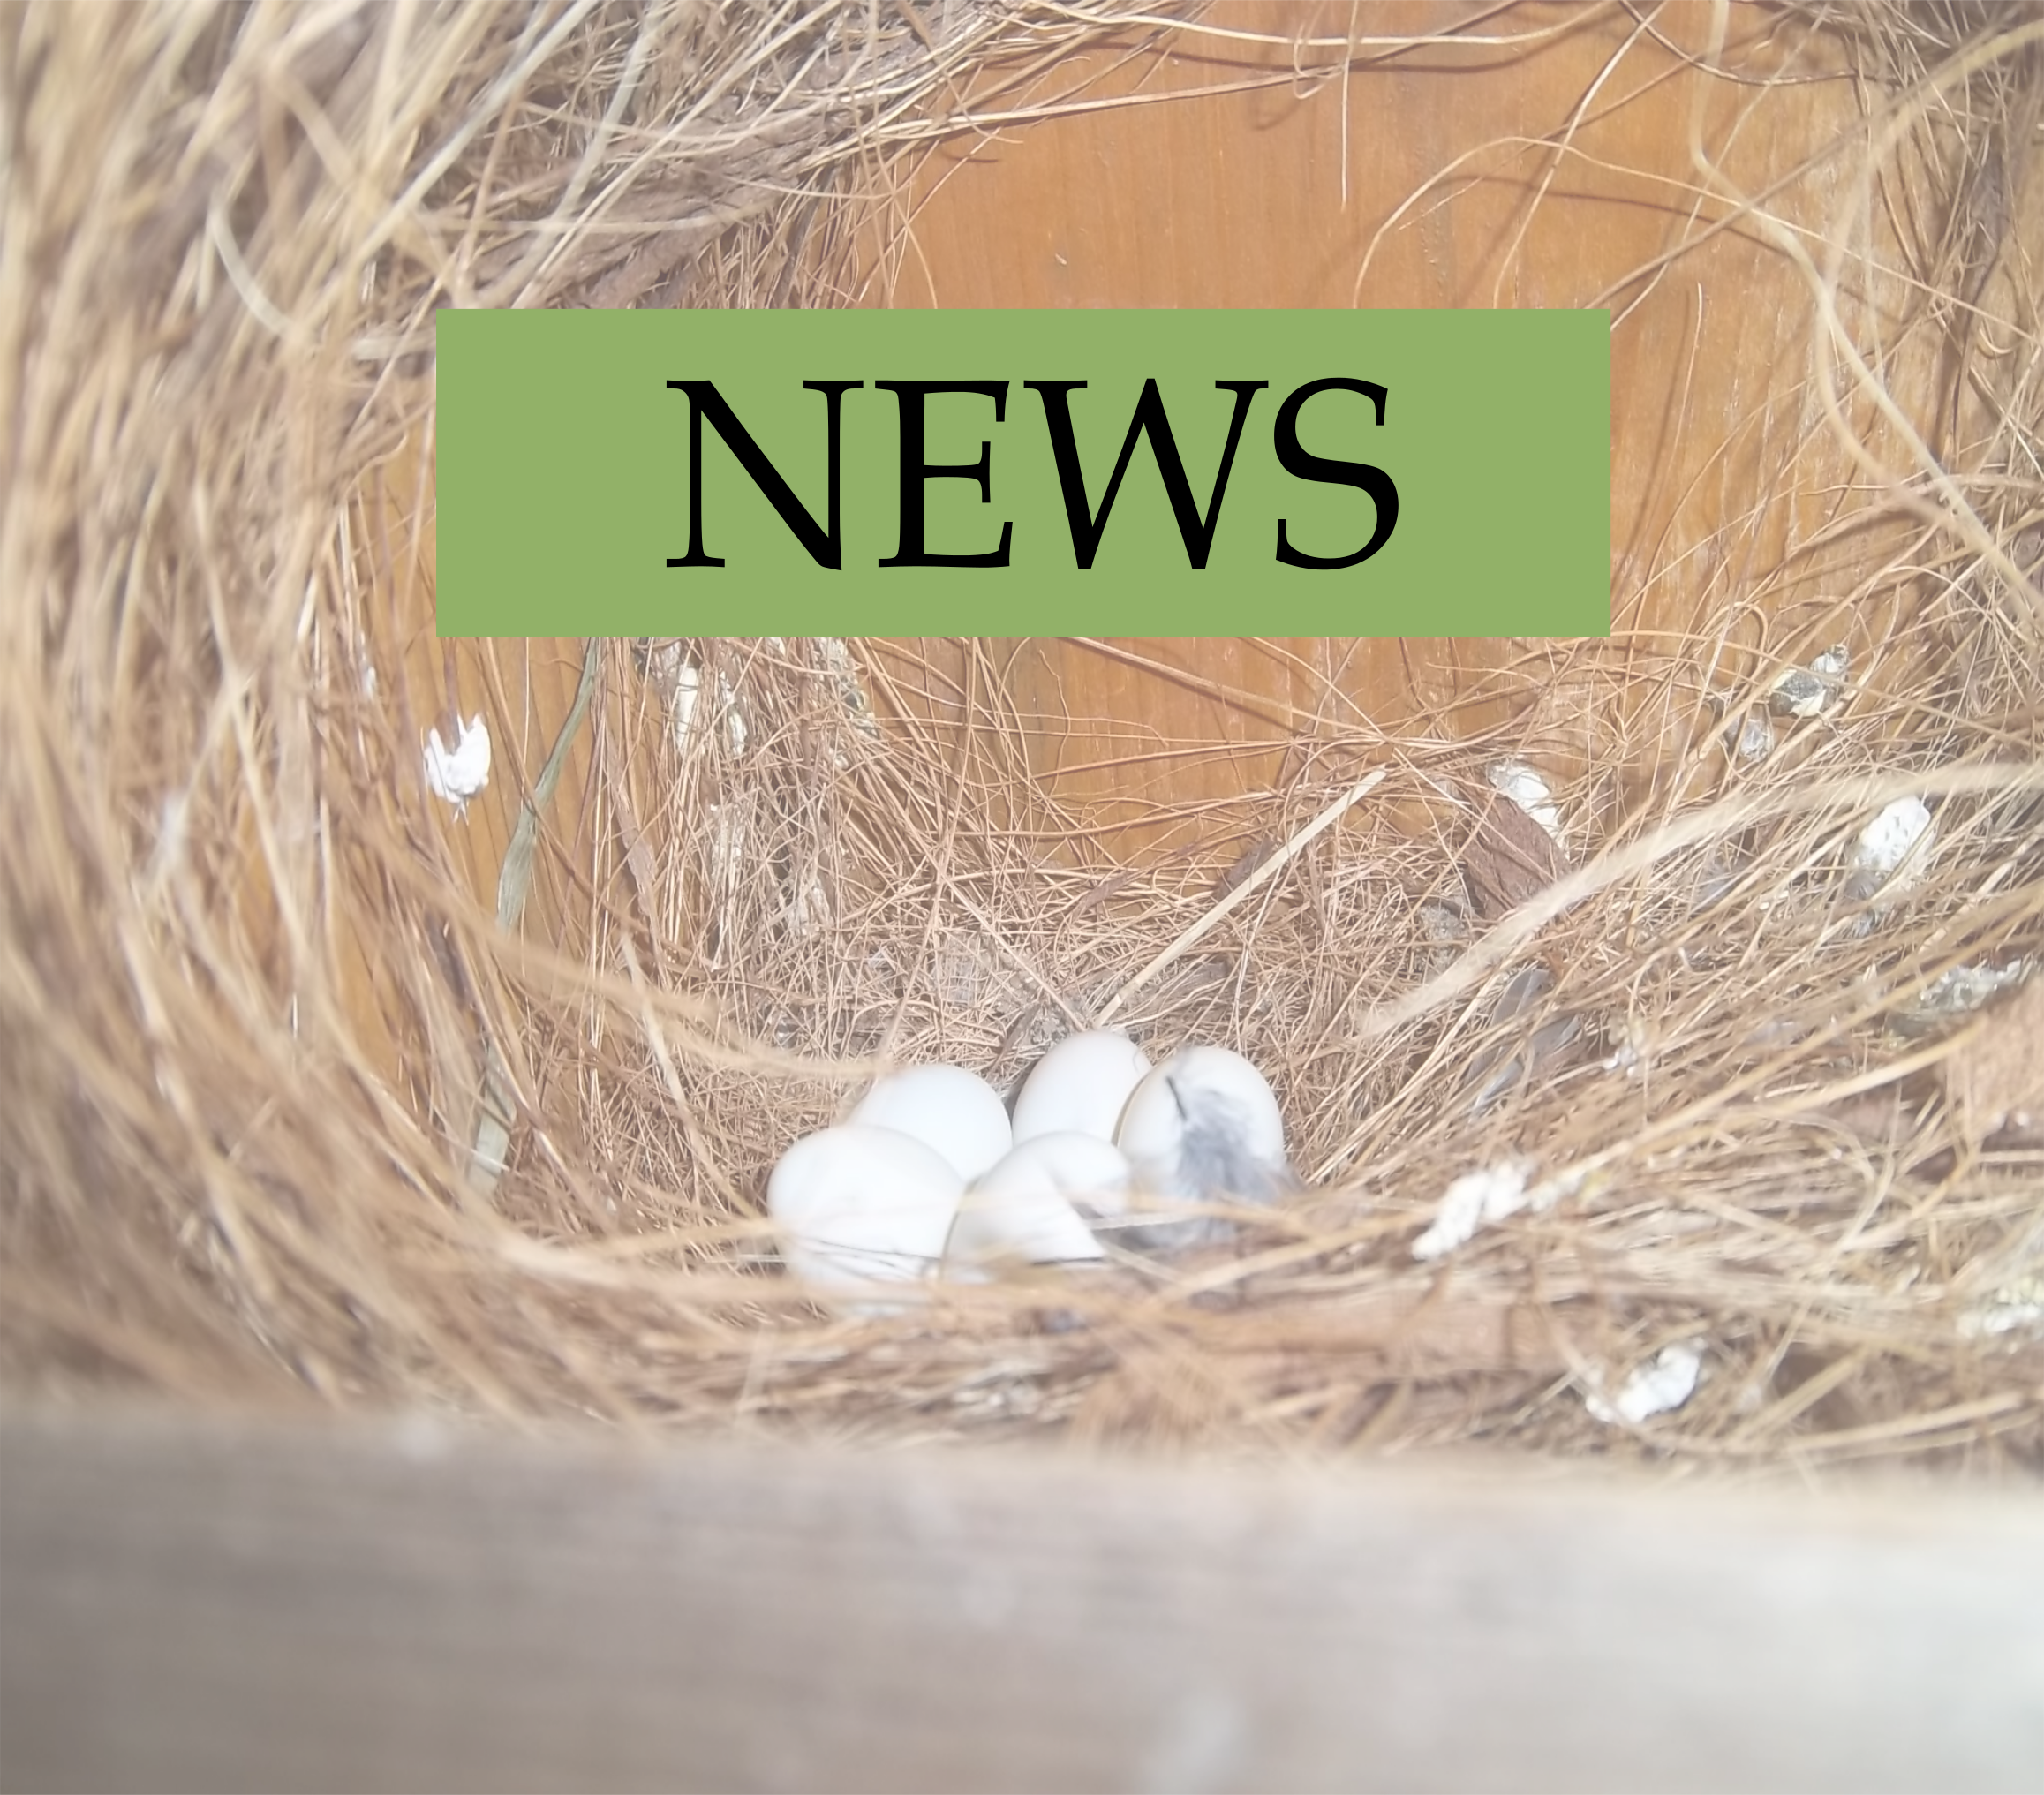 nest with eggs and the headline "NEWS"